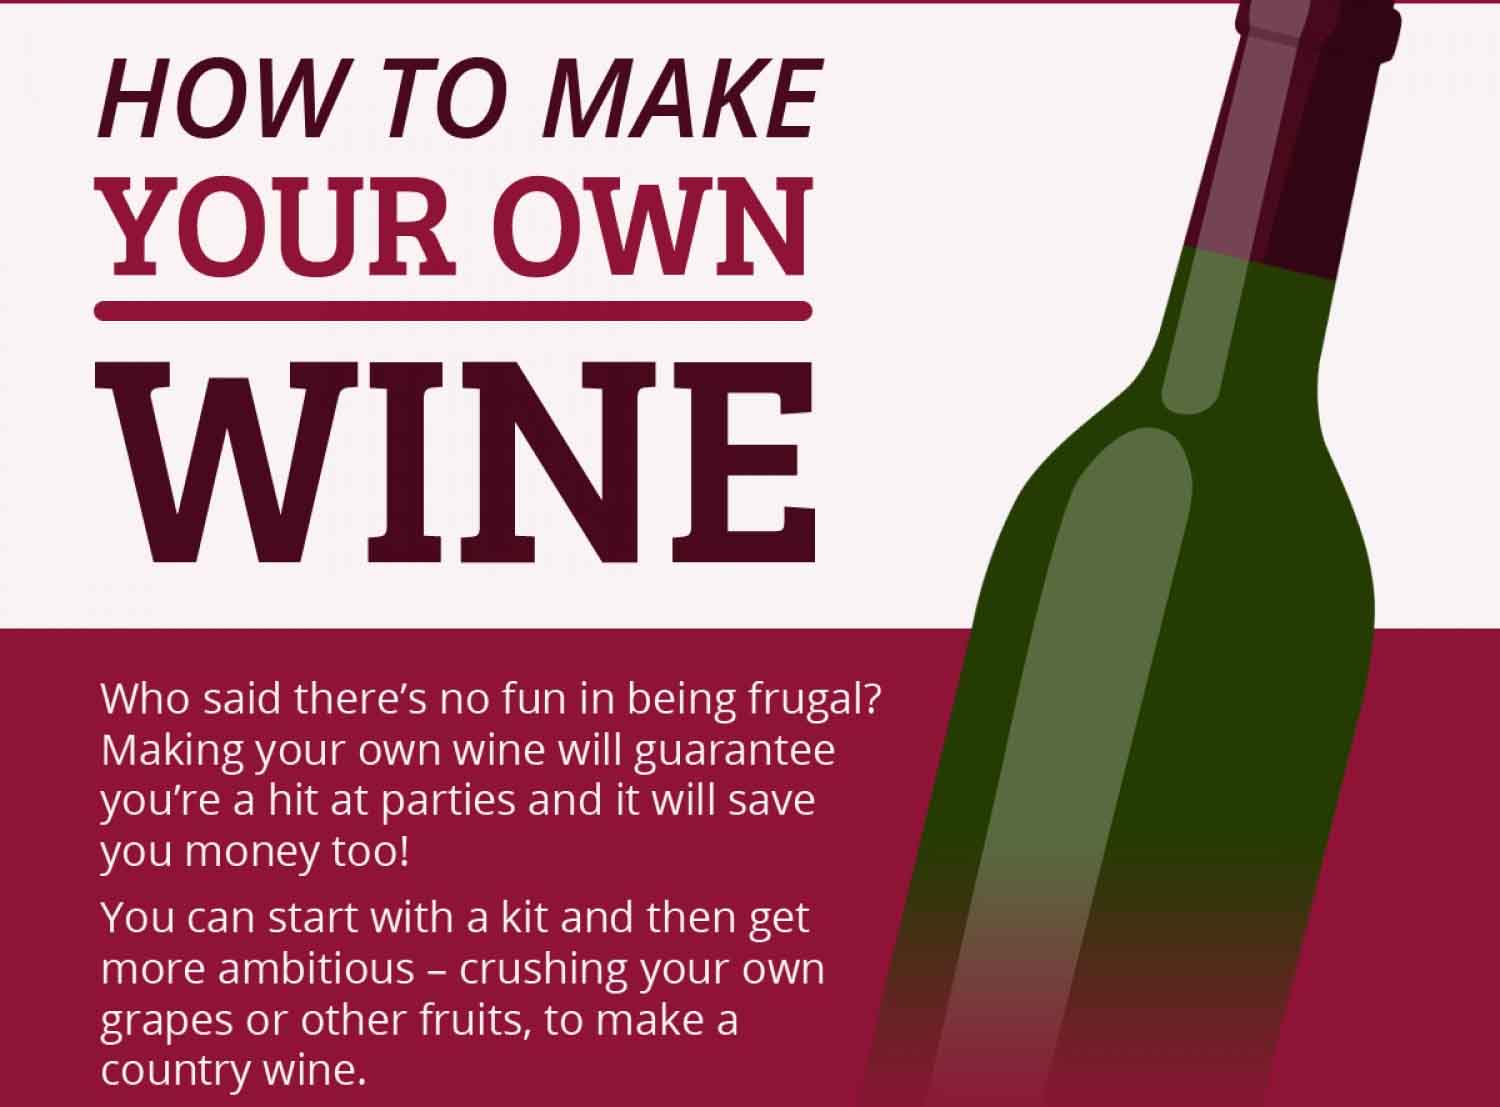 How to Make Your Own Wine